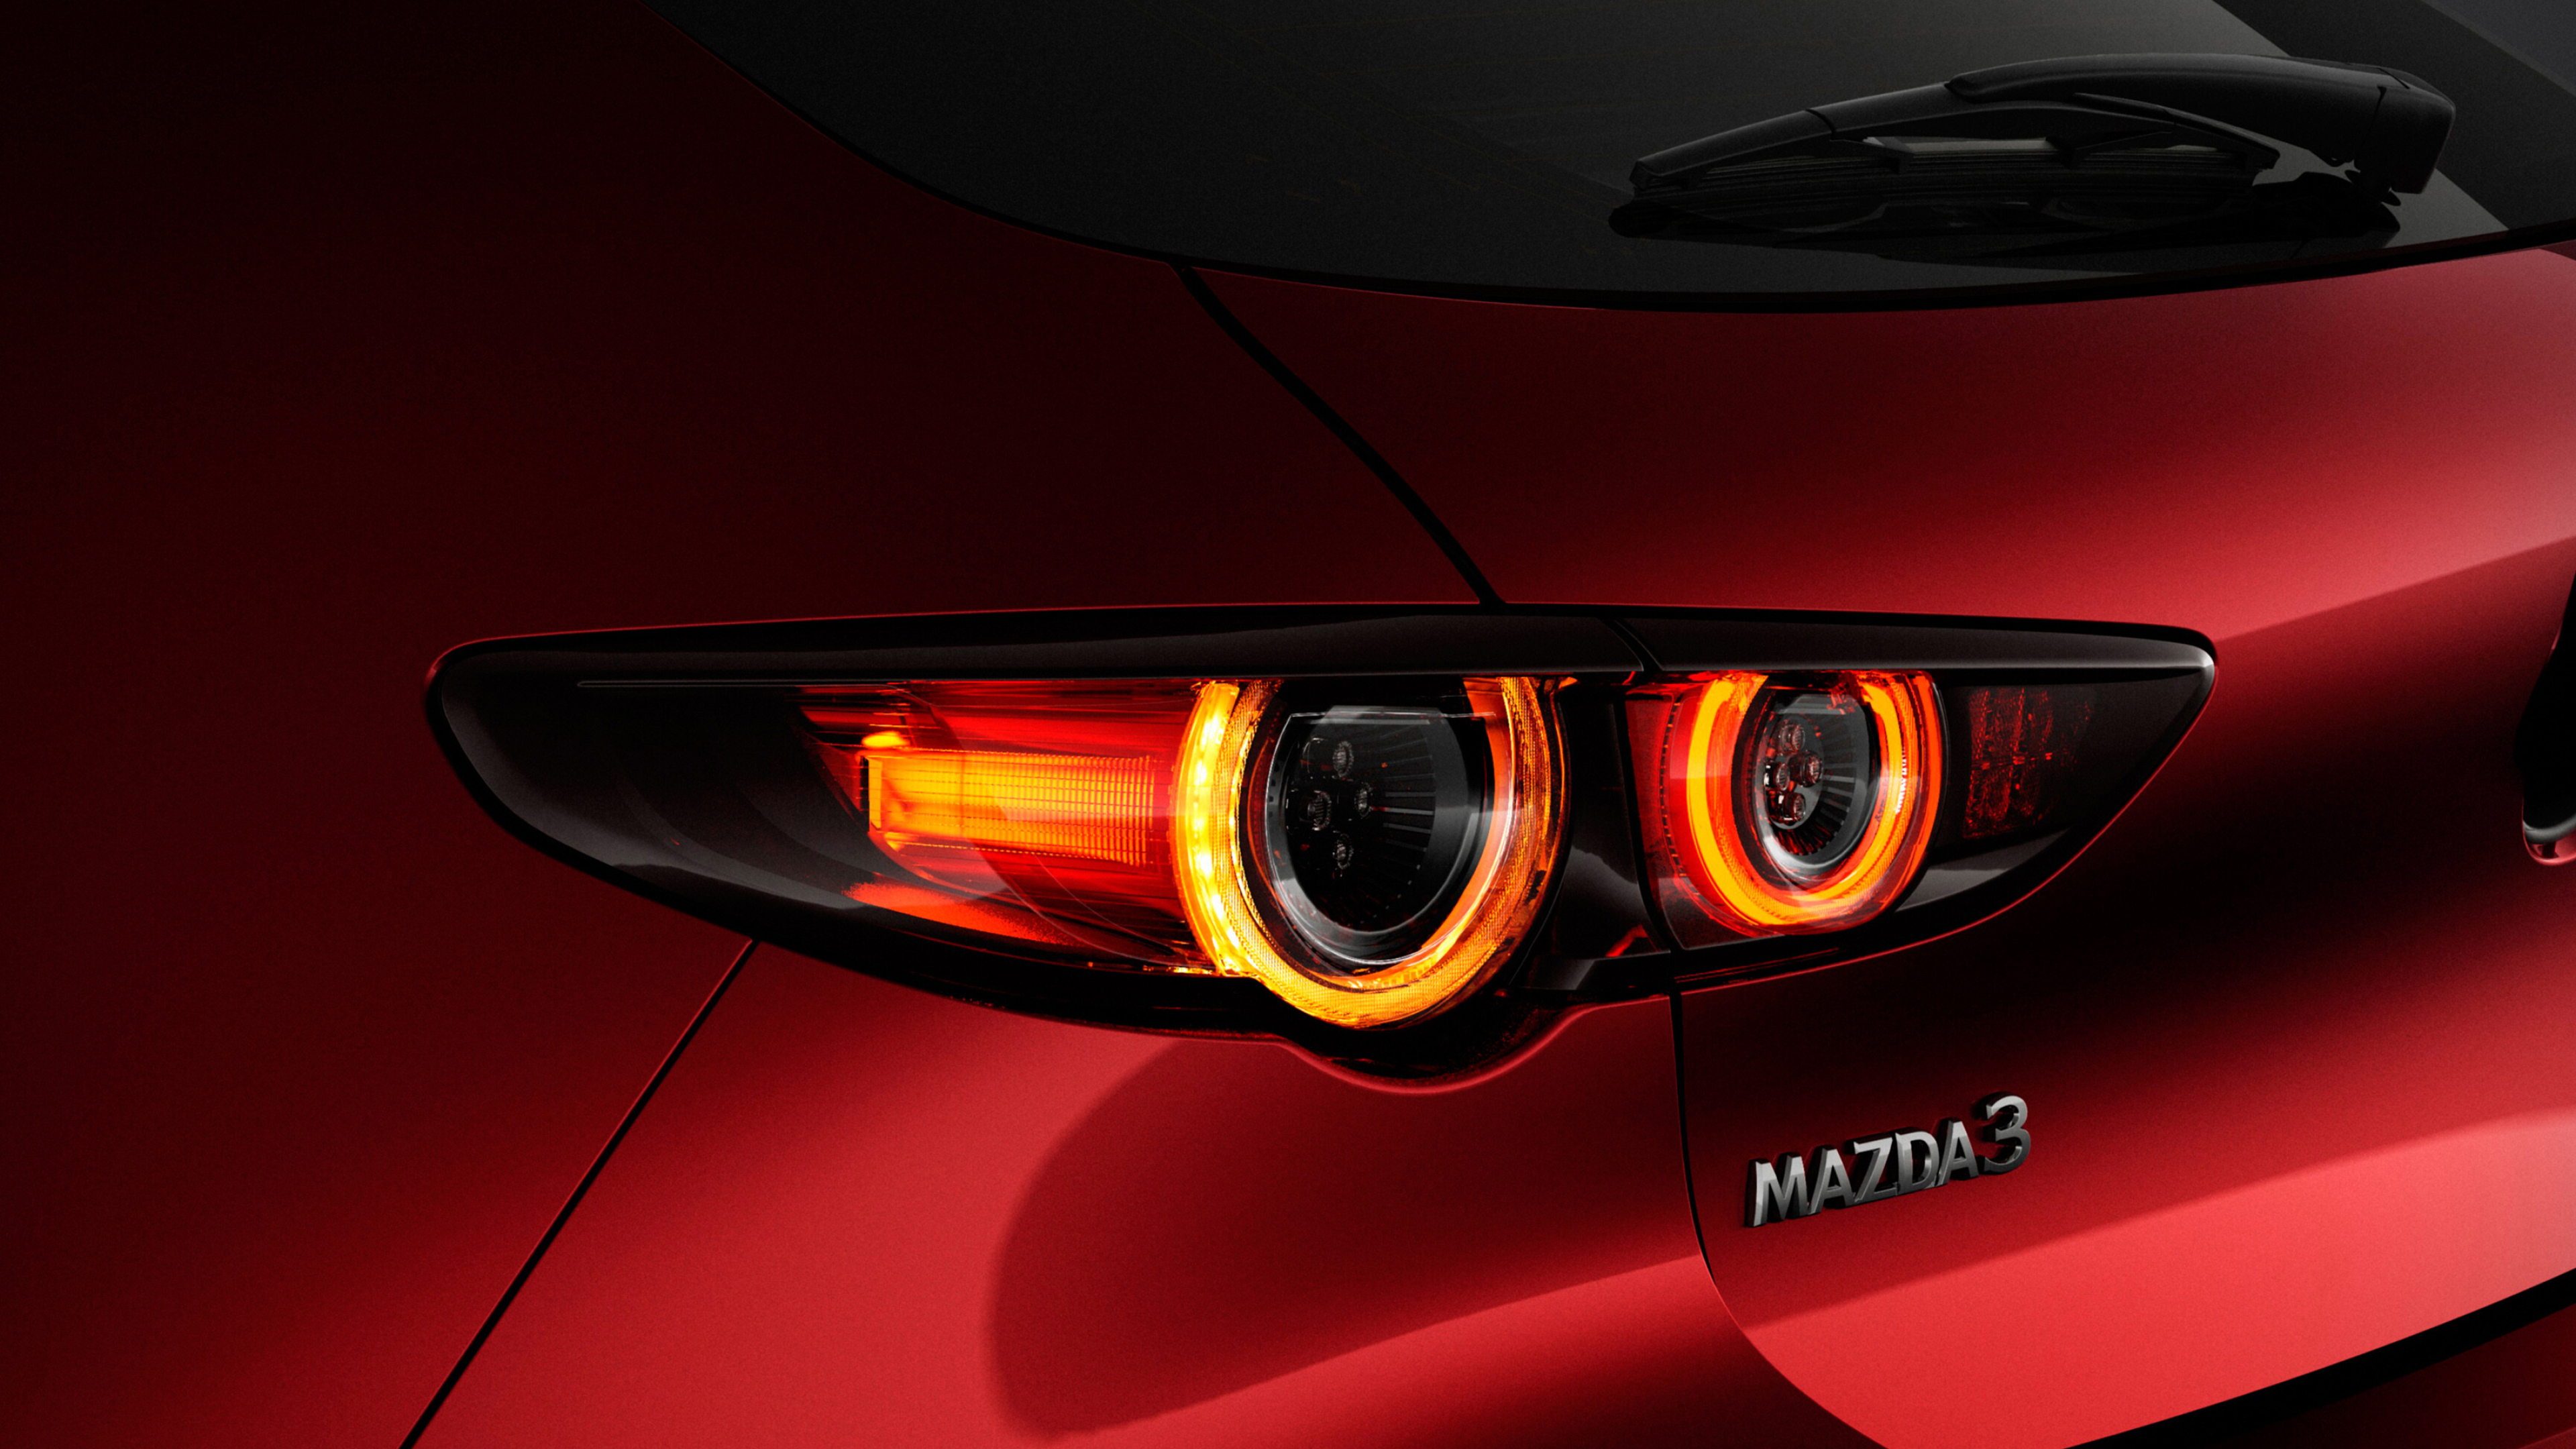 Mazda: 3 Hatchback, A compact car manufactured by a Japanese manufacturer. 3840x2160 4K Wallpaper.